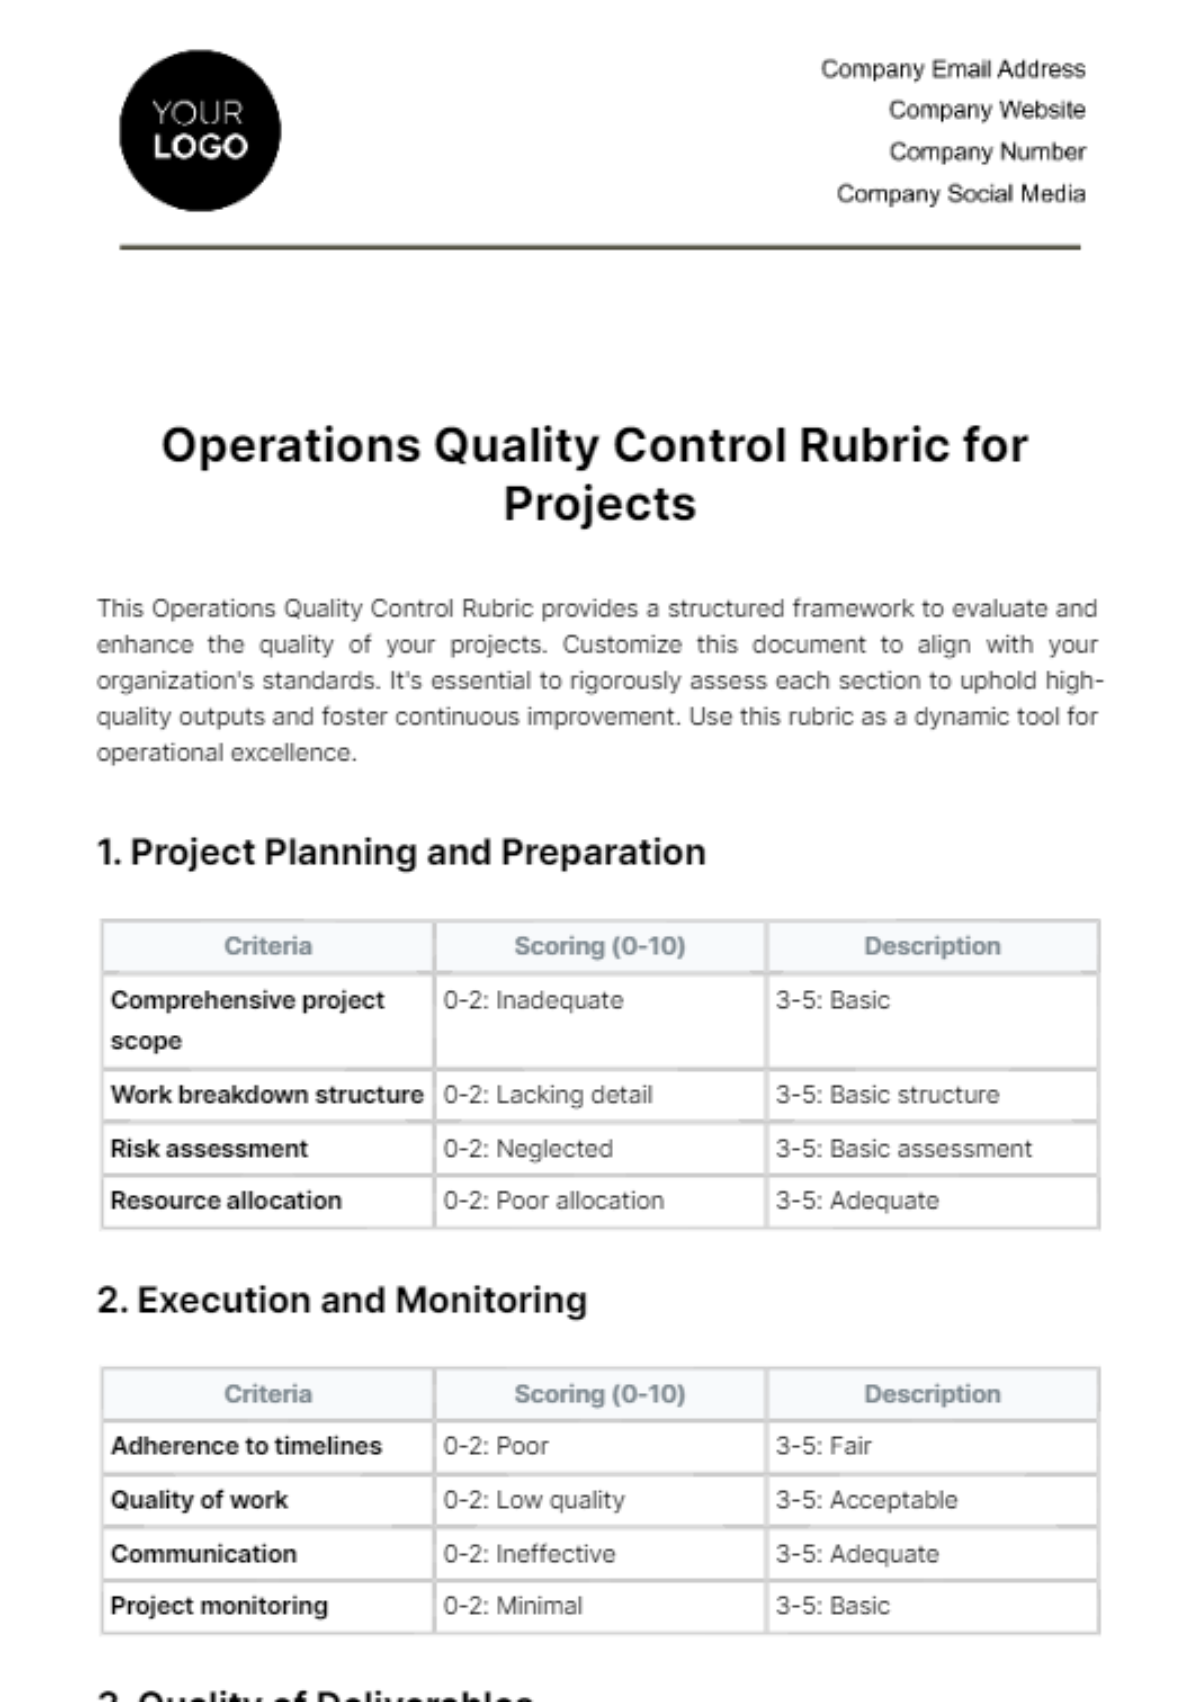 Free Operations Quality Control Rubric for Projects Template